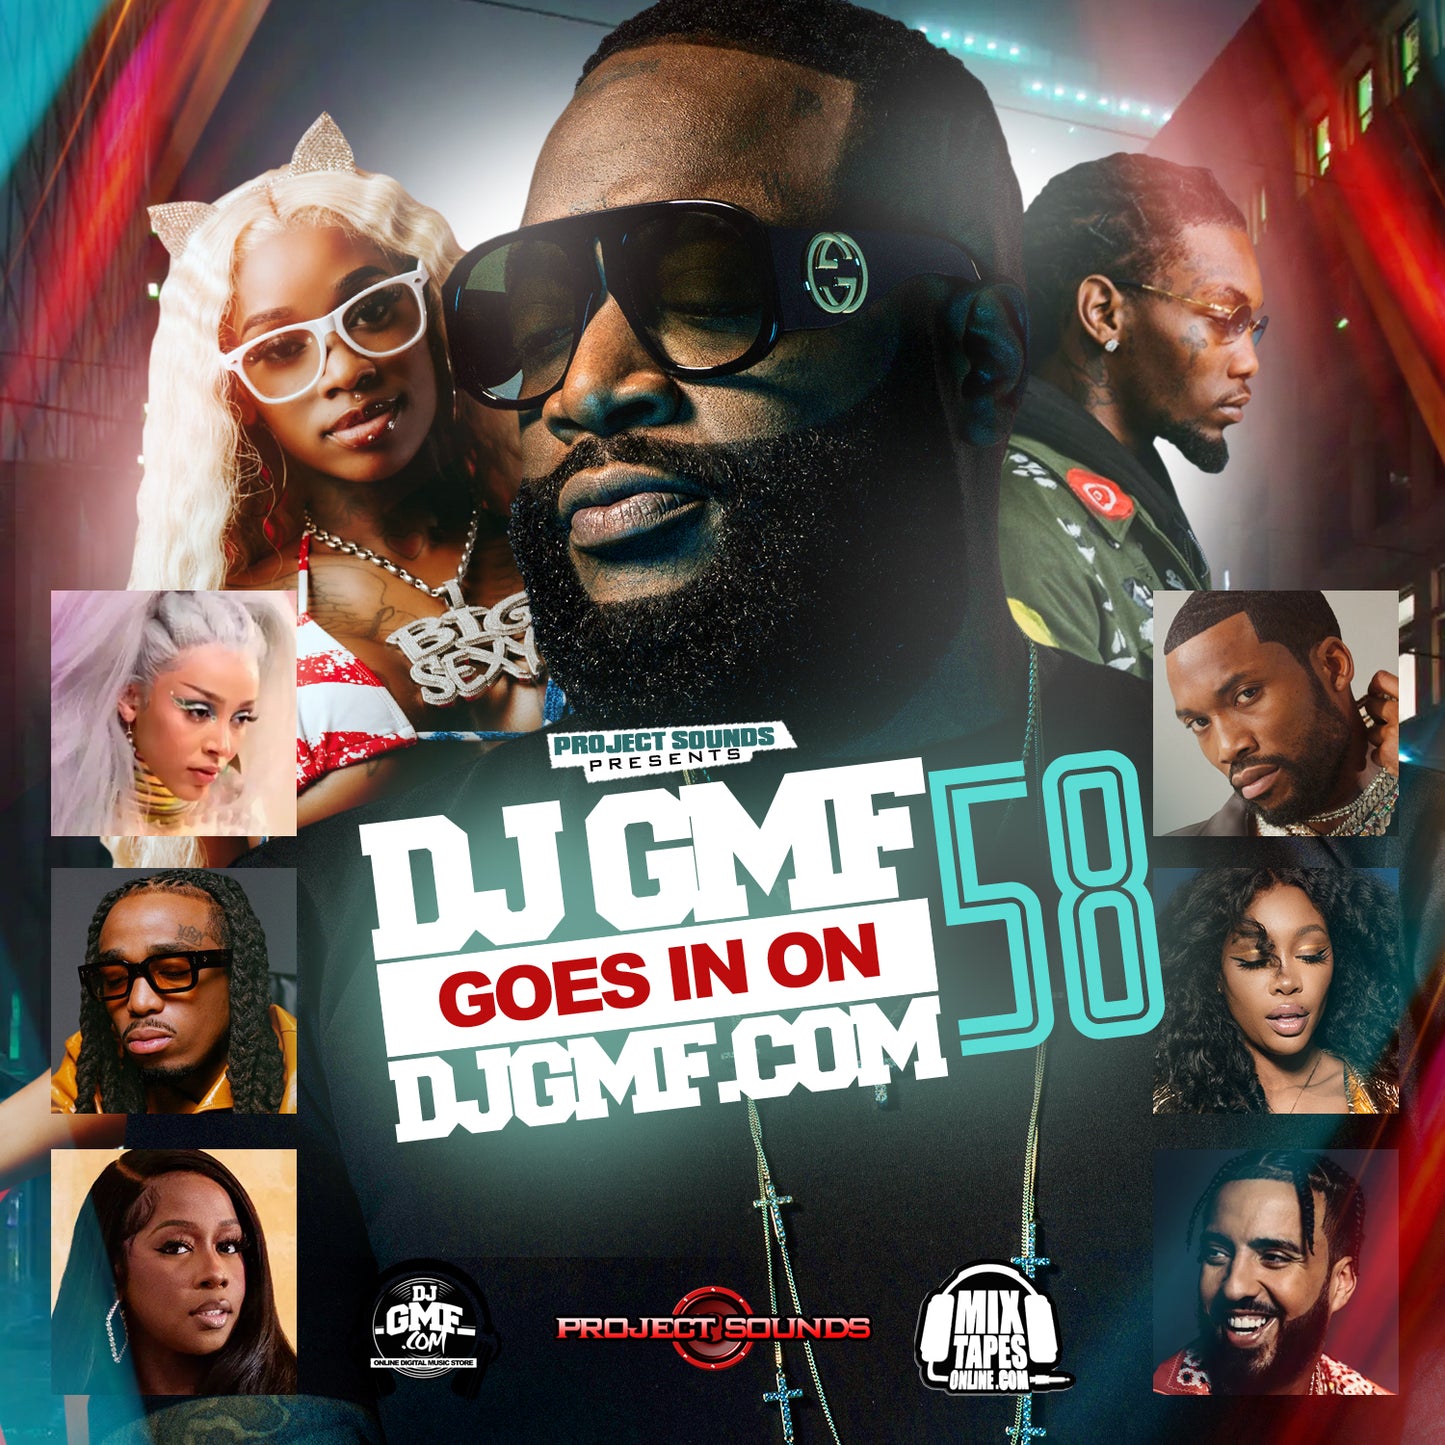 GMF GOES IN ON DJGMF.COM VOL.58